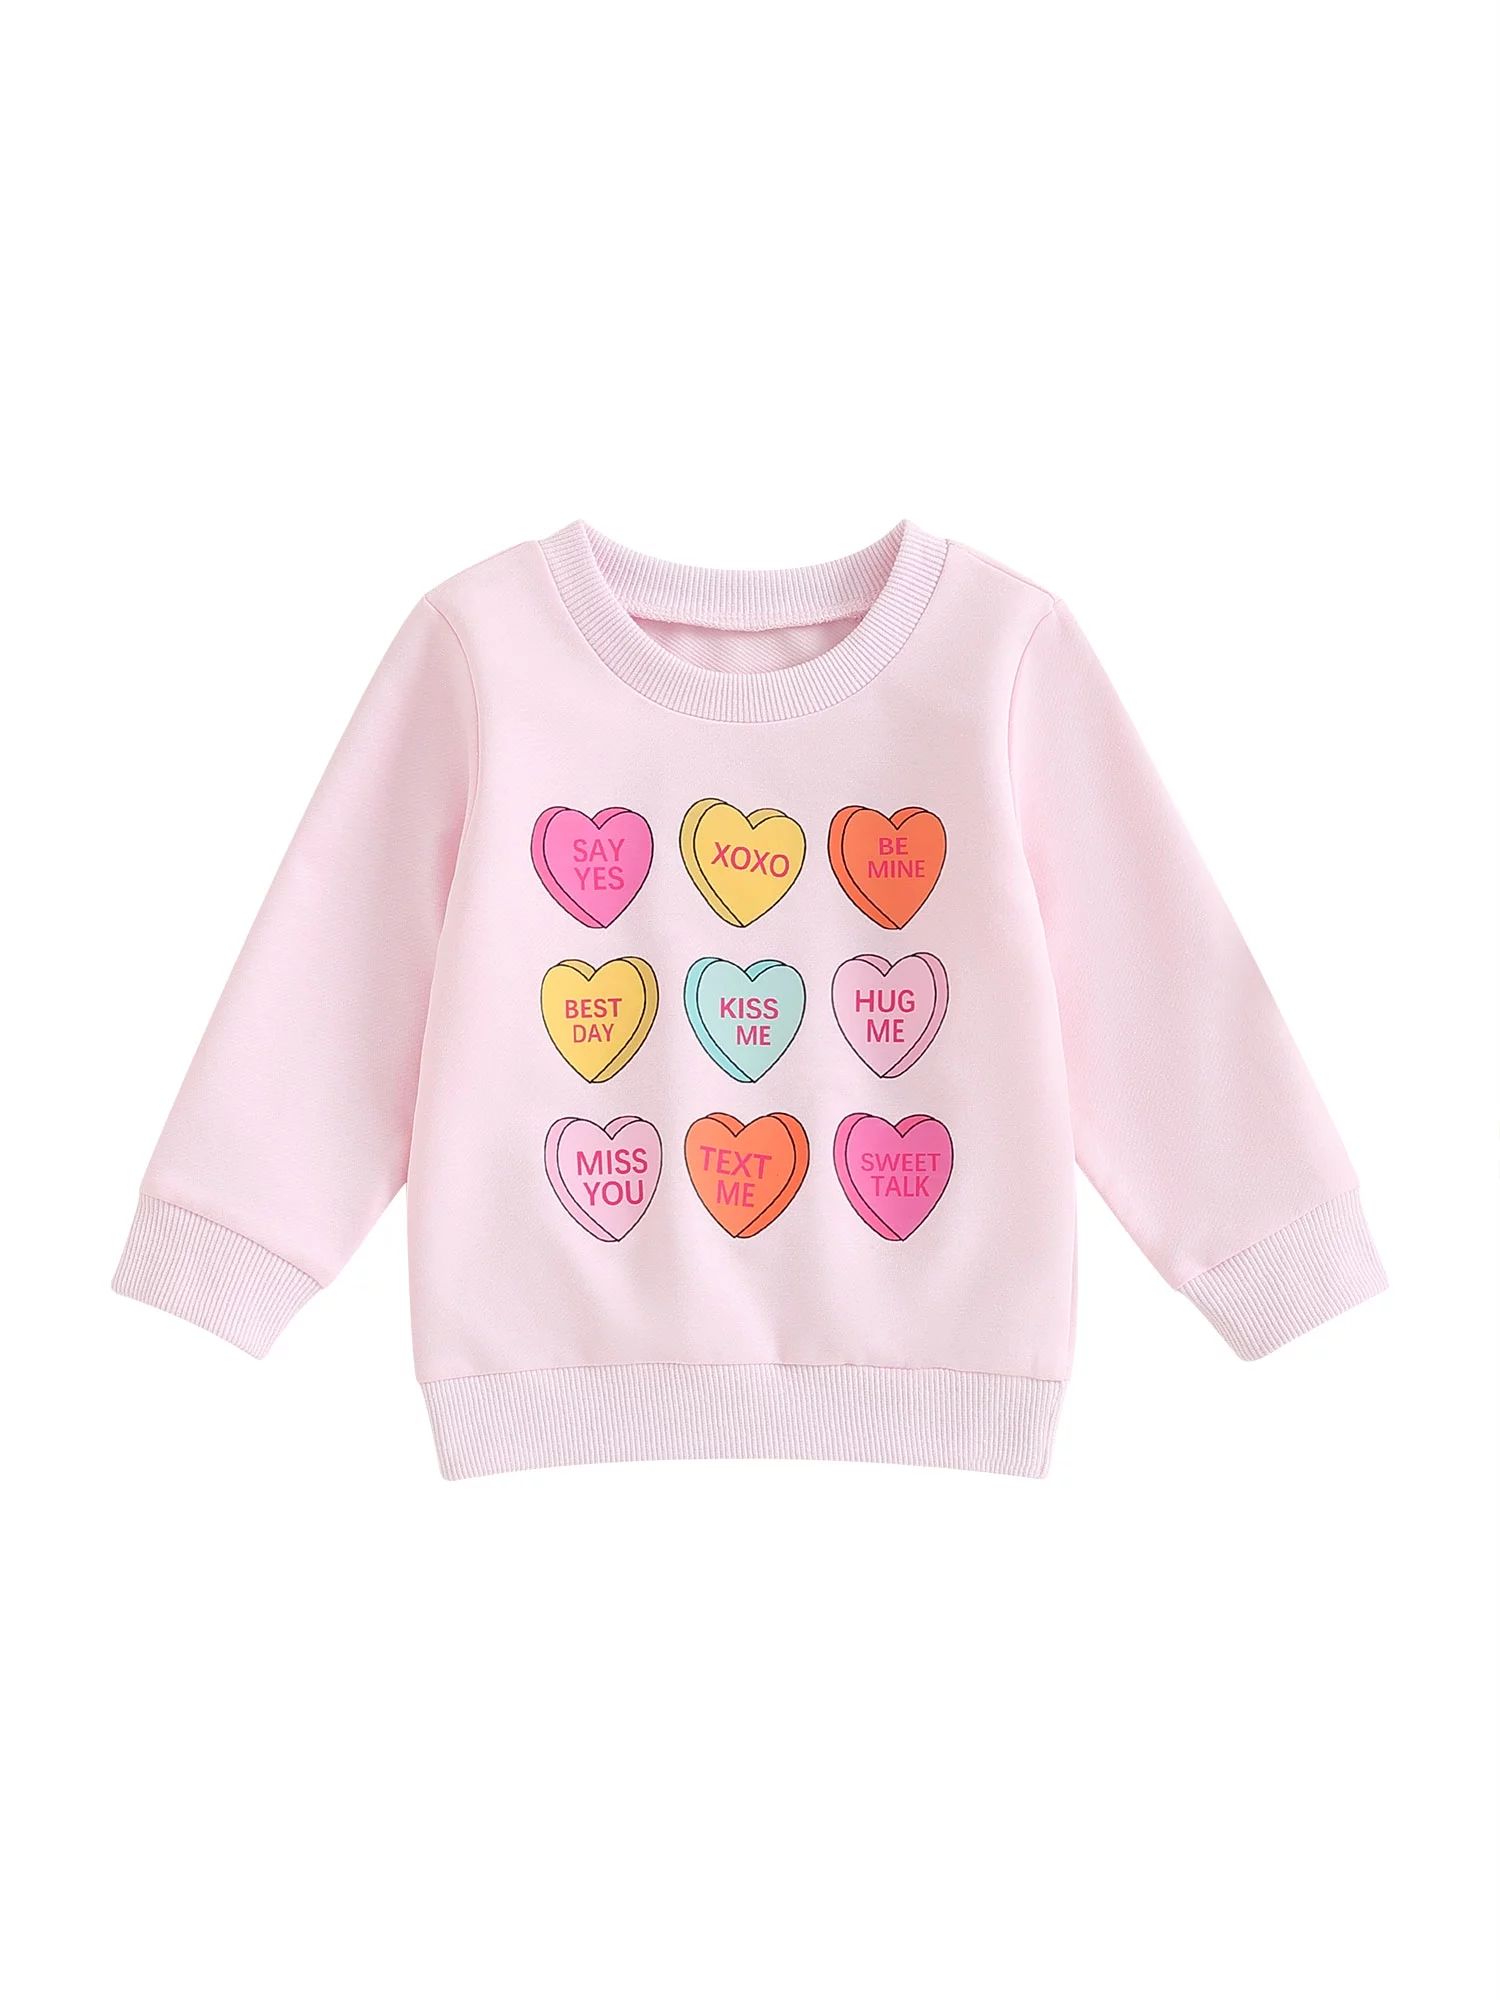 Toddler Baby Girl Boy Valentines Day Outfit Long Sleeve Crewneck  Sweatshirt Oversized Pullovers ... | Walmart (US)